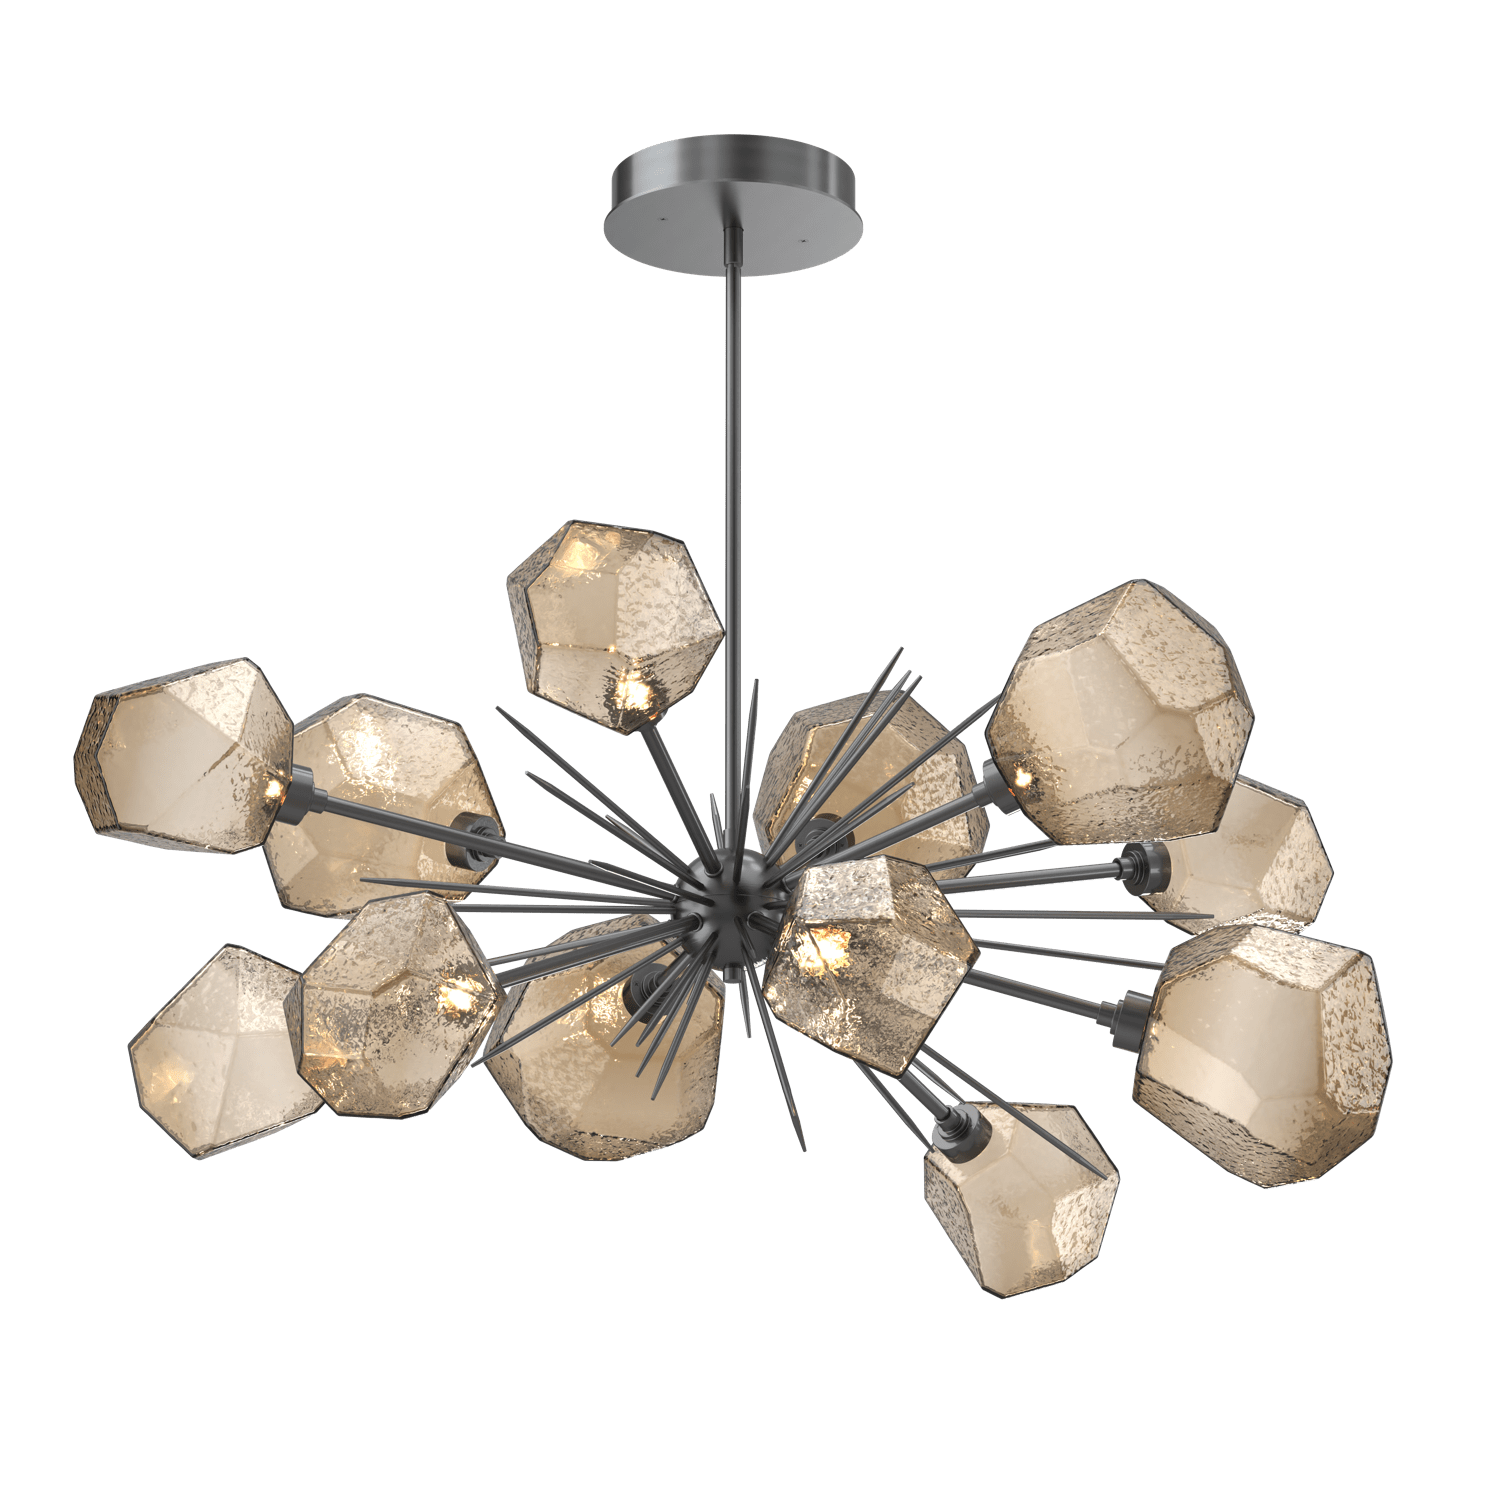 PLB0039-0D-GM-B-Hammerton-Studio-Gem-43-inch-oval-starburst-chandelier-with-gunmetal-finish-and-bronze-blown-glass-shades-and-LED-lamping